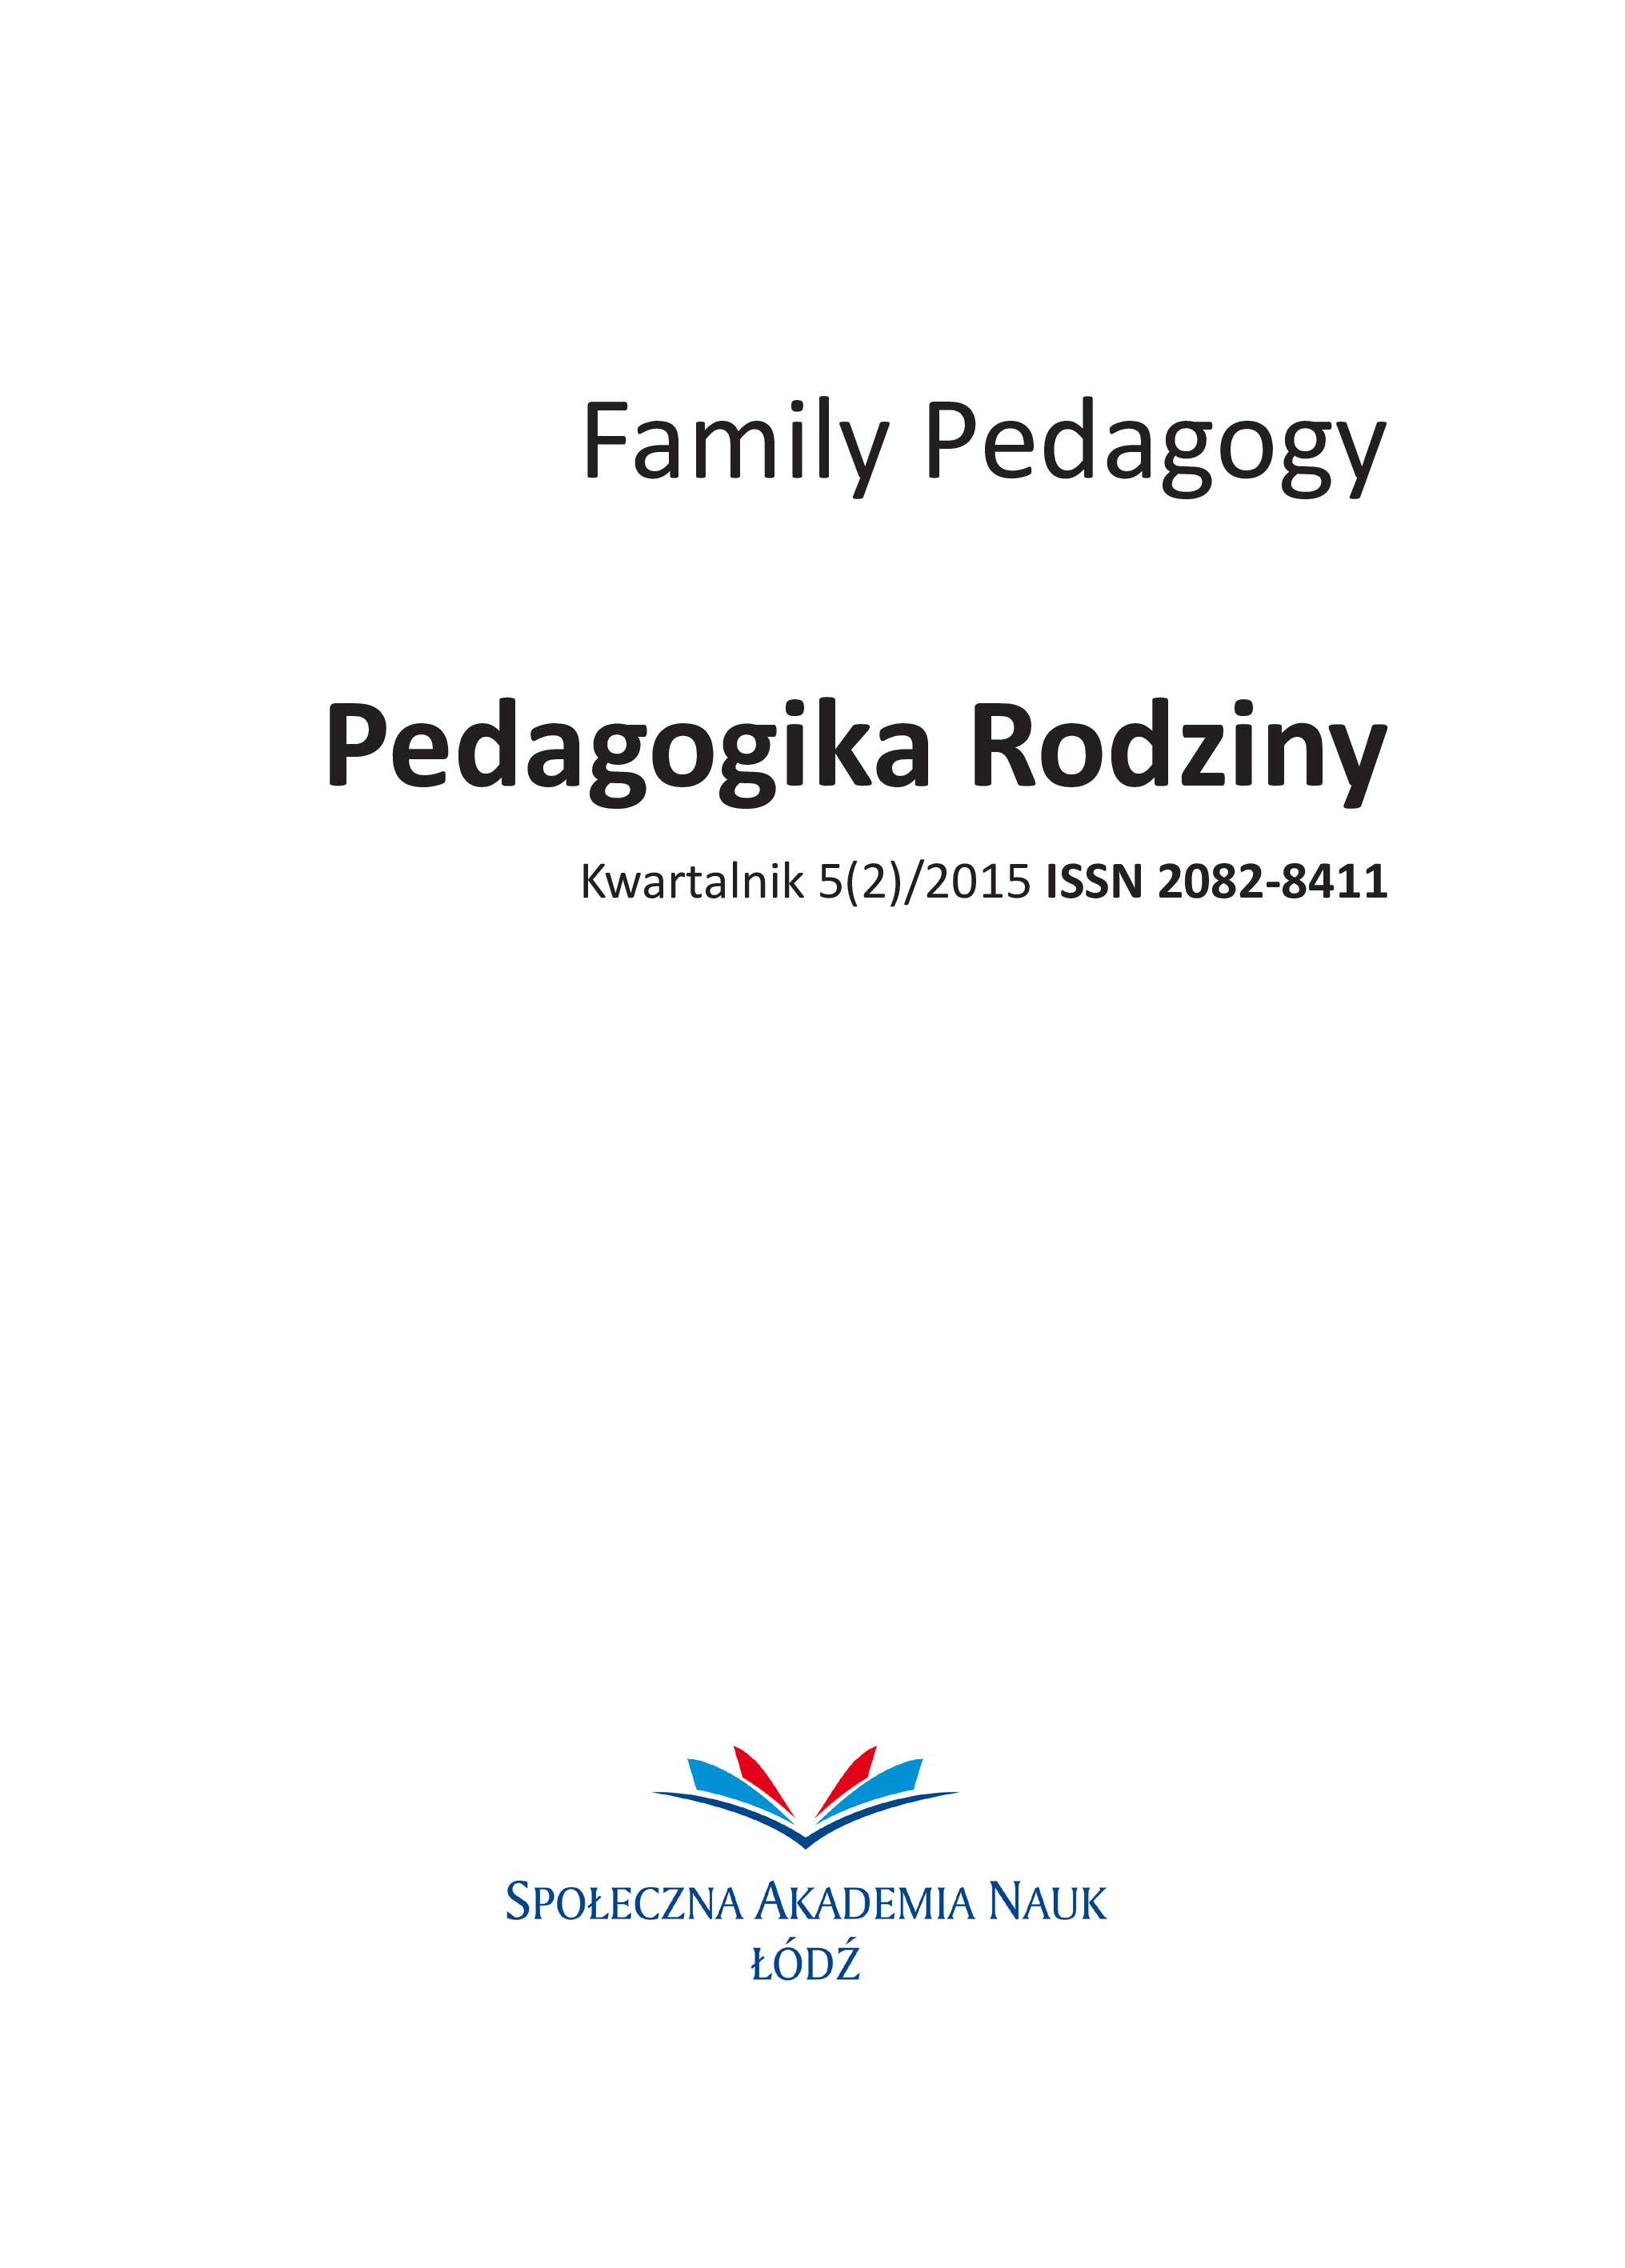 Distance Education in Poland, the Integrity of a student, the Pupil and Material Situation at Schools Cover Image